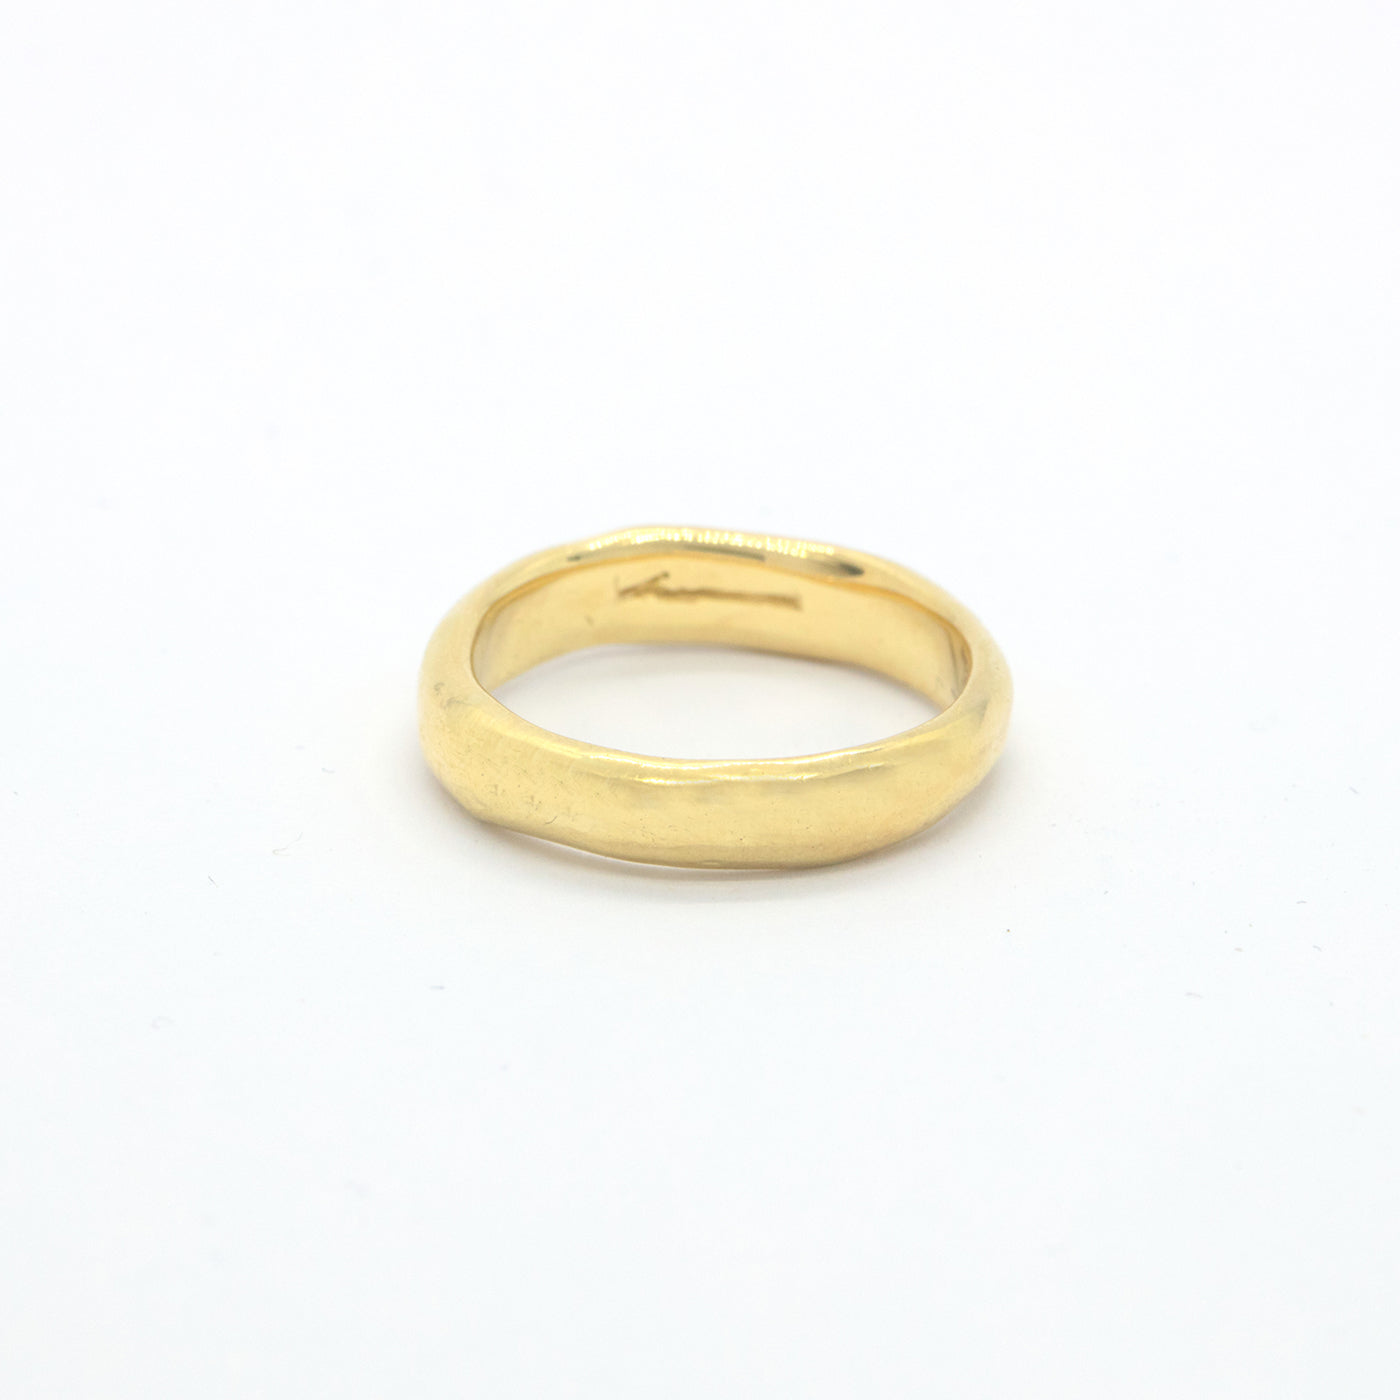 Ring Tara Wedding Band for Her 14ct or 18ct yellow gold product view innan jewellery independent atelier berlin